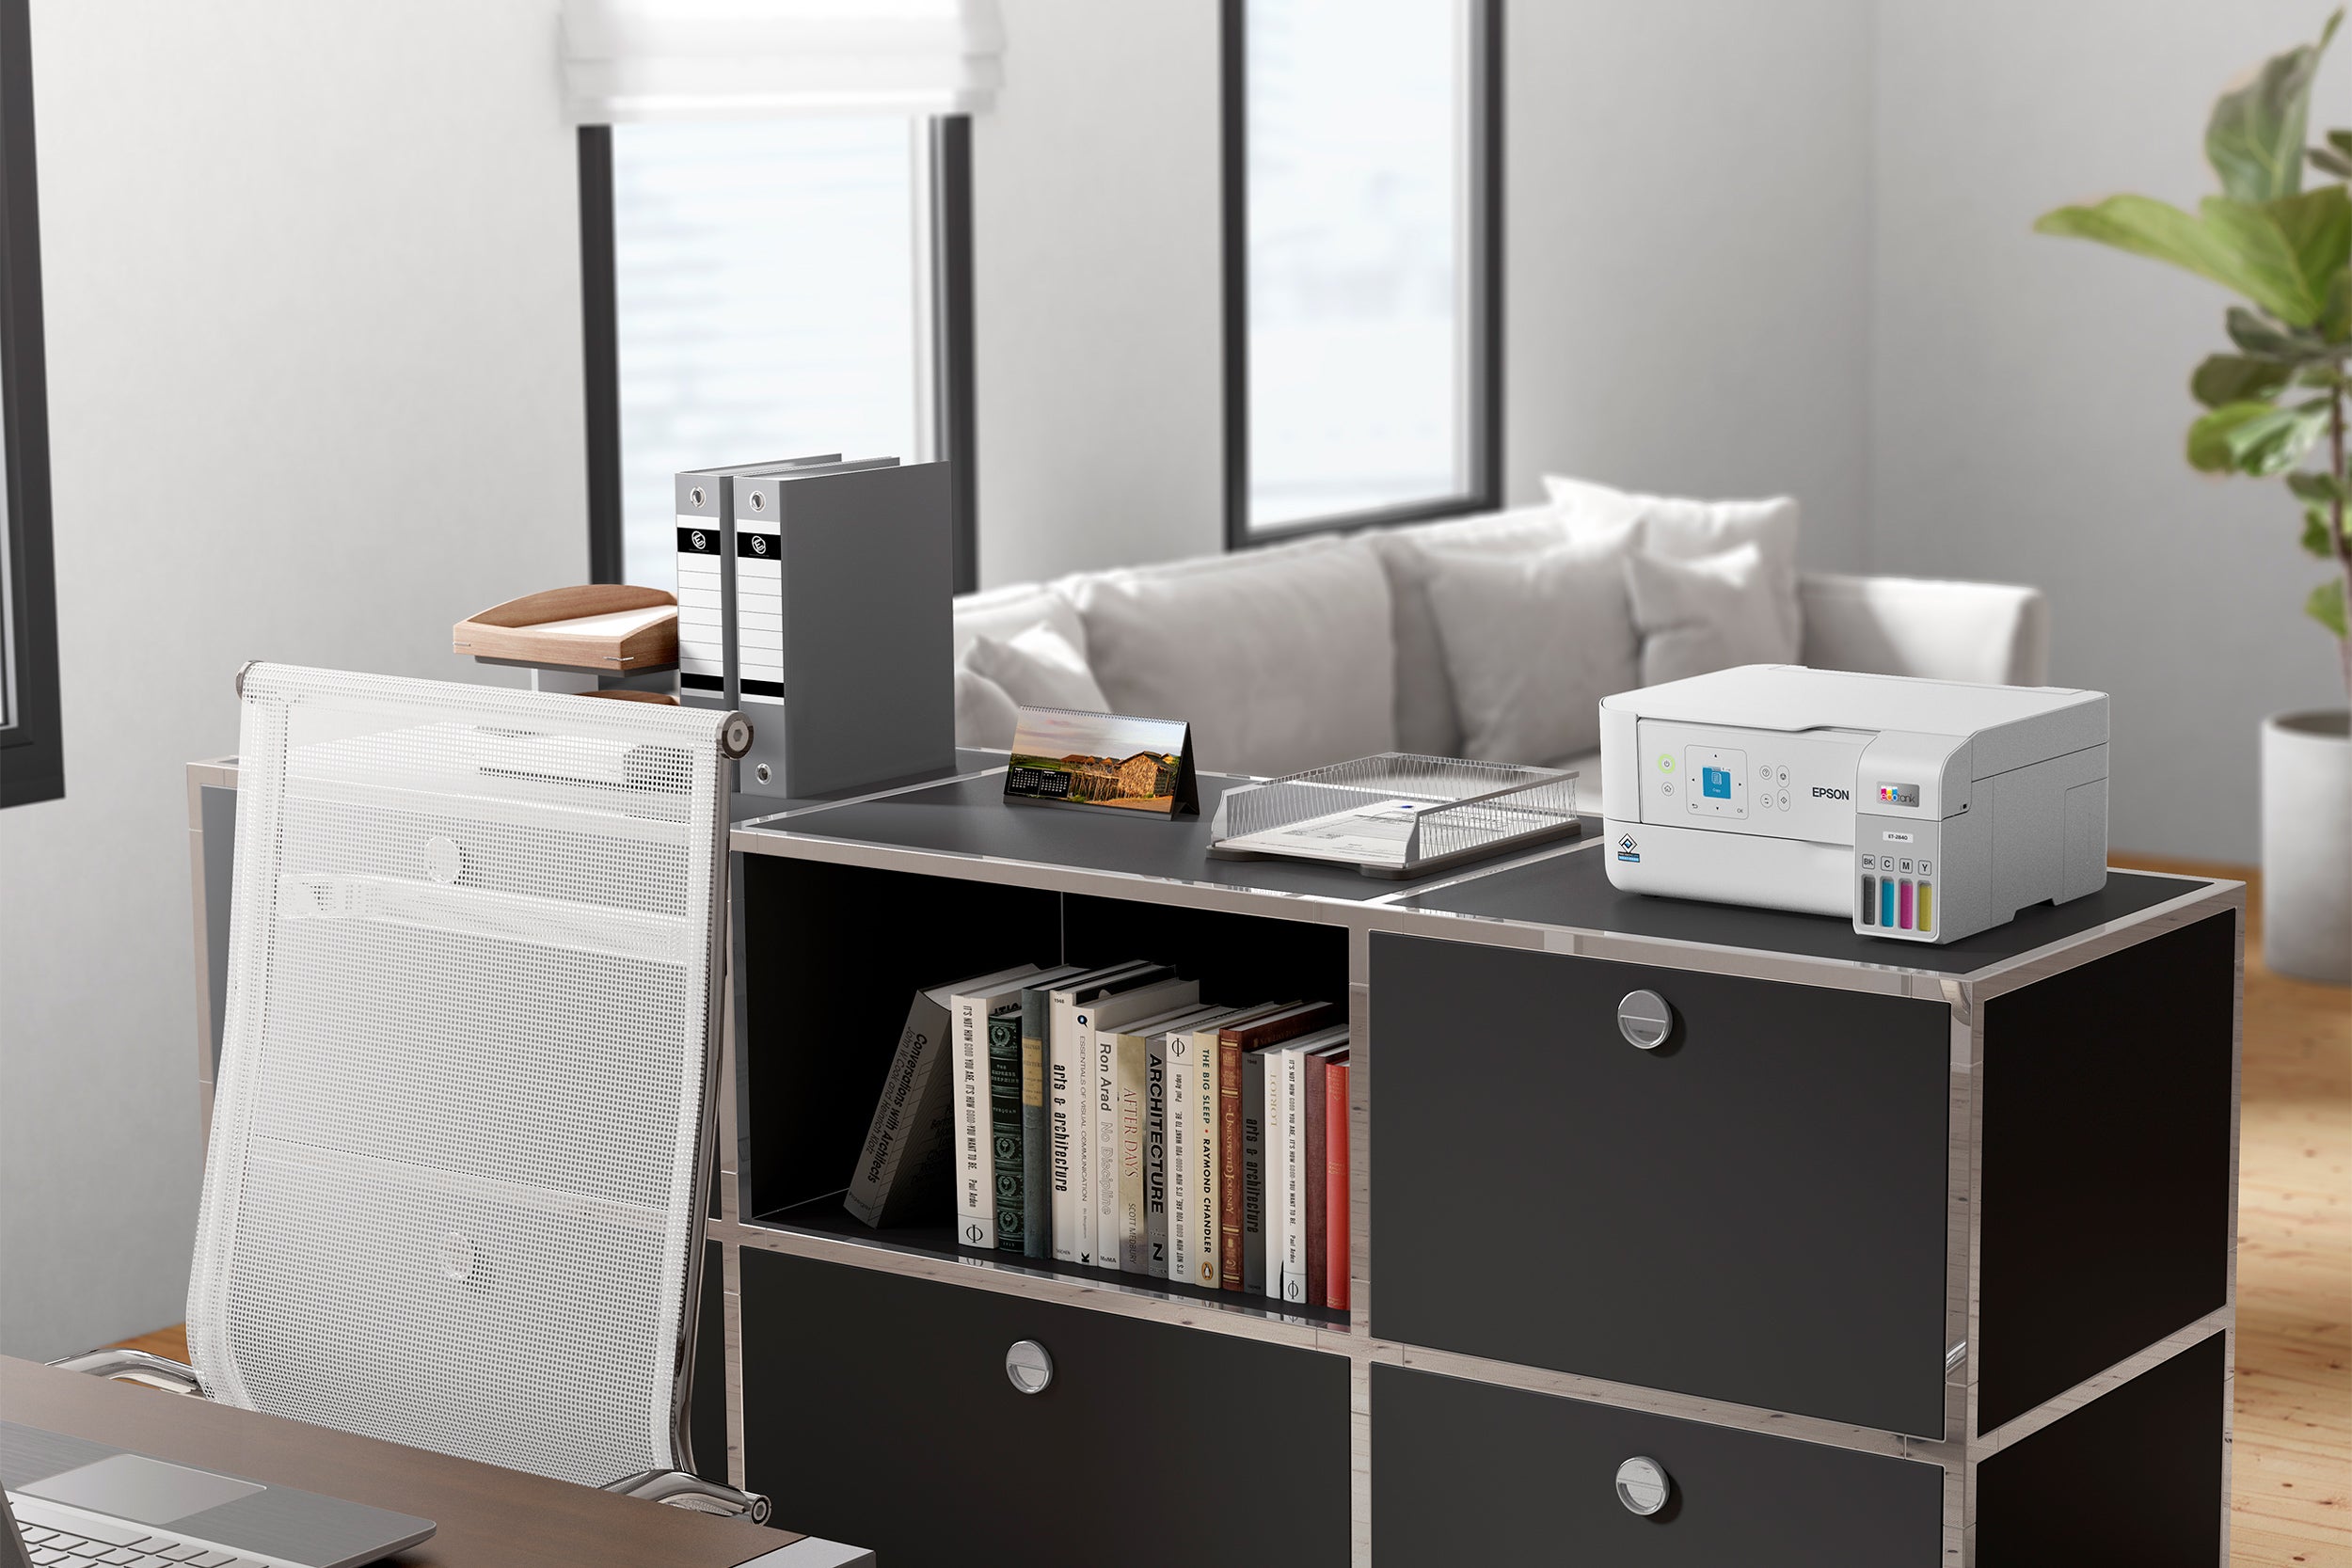 Epson releases two new EcoTank printers that skip the ink cartridges